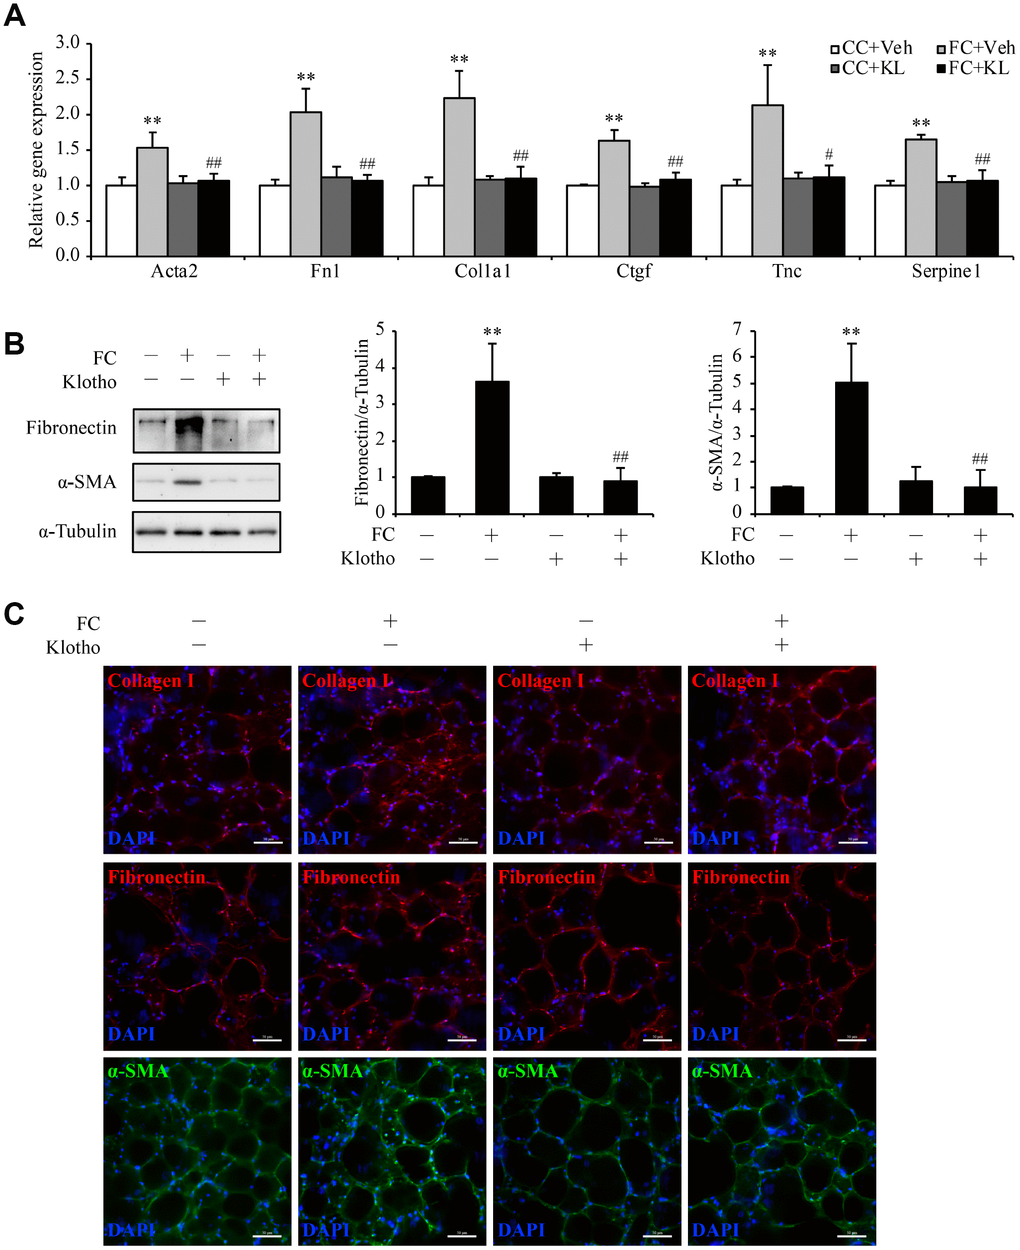 Kl markedly ameliorates pulmonary fibrosis in an ex vivo model. Mouse PCLSs that were pre-incubated with vehicle (Vel) or mouse rKL for 24 h were randomized to be treated with control cocktail (CC) or fibrosis cocktail (FC) with or without KL for another 48 h. mRNA levels of Acta2, Fn1, Col1a1, Ctgf, Tnc, and Serpine1 were assessed by qPCR (A), protein levels of fibronectin and α-SMA were measured by western blotting (B), and fibronectin, α-SMA, and collagen I were stained by immunofluorescence staining (C) in the mouse PCLSs from each group (CC+Veh, white bars; FC+Veh, light gray bars; CC+rKL, dark gray bars; FC+rKL, black bars). Scale bars = 50 μm. **P vs. CC+Veh. #P P vs. FC+Veh.